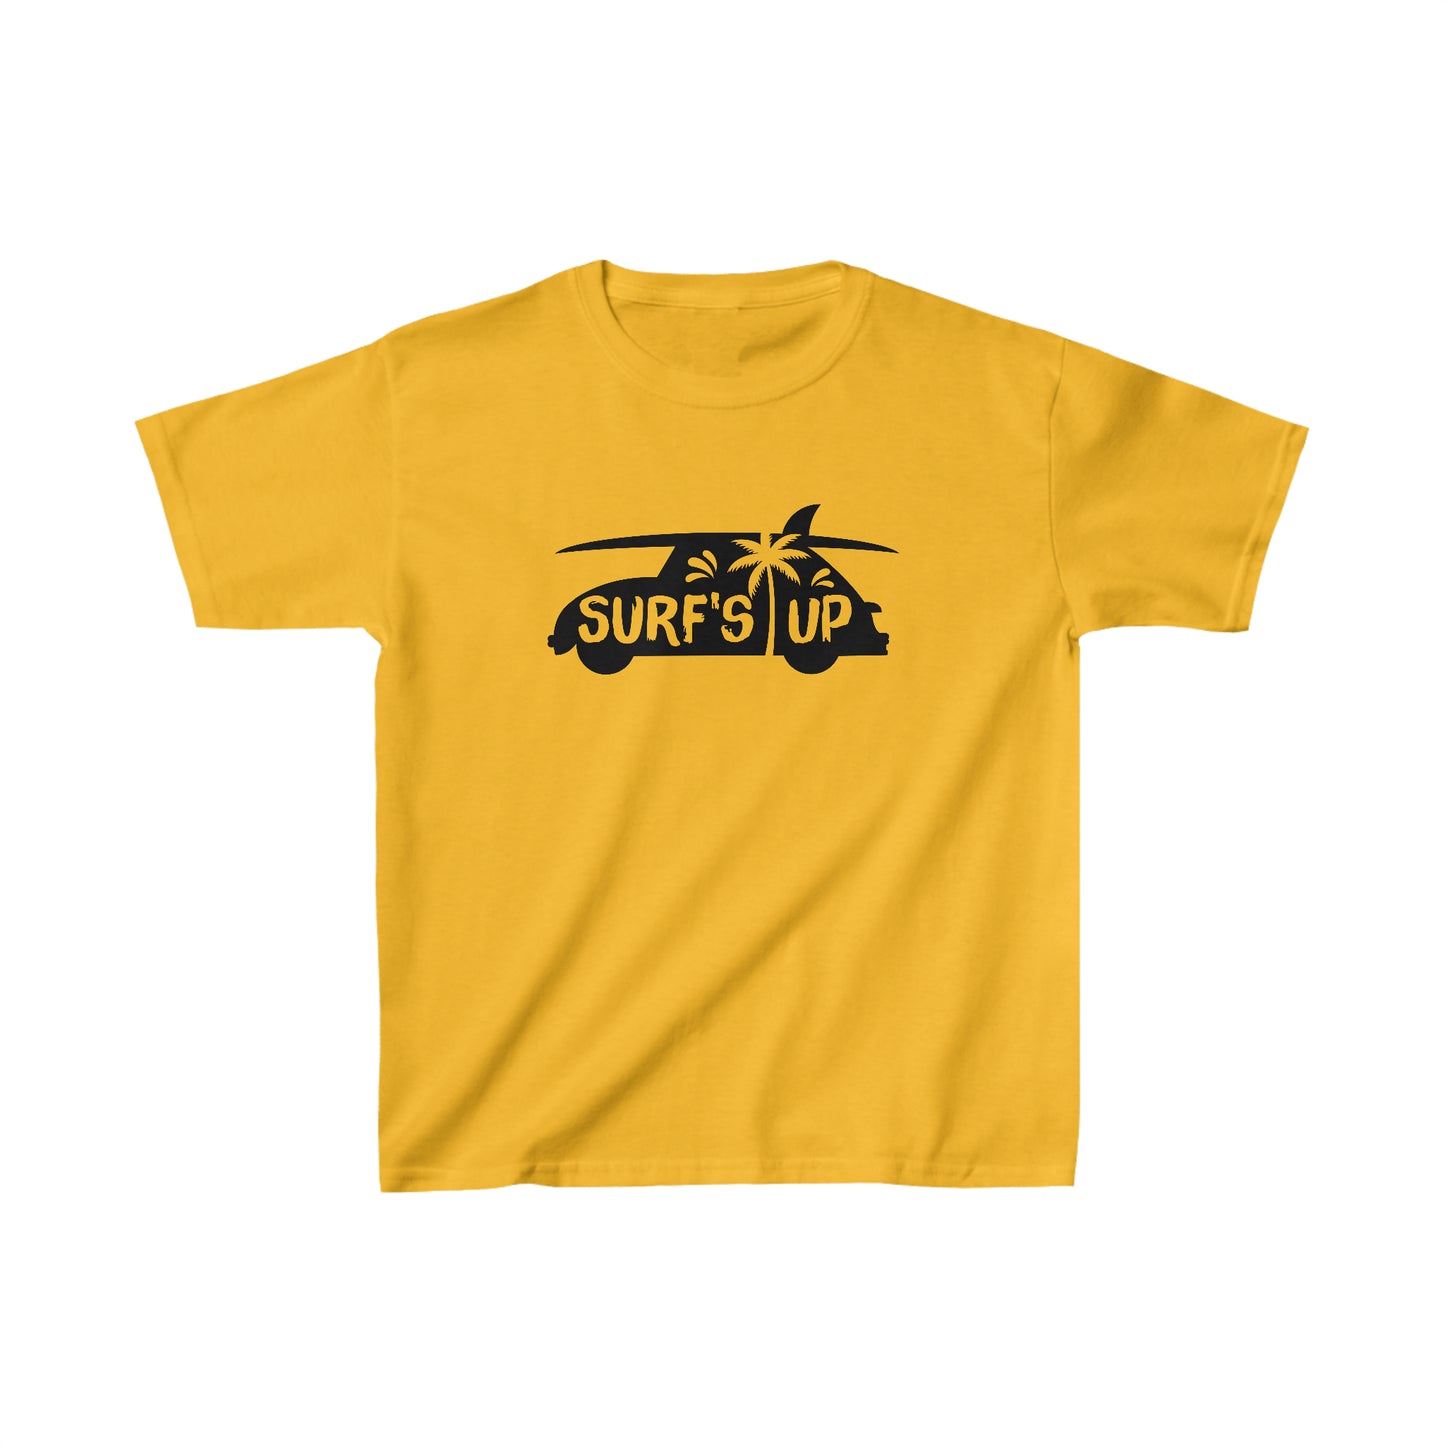 Surf's Up - Car and Surfboard Silhouette - Kids Heavy Cotton Tee